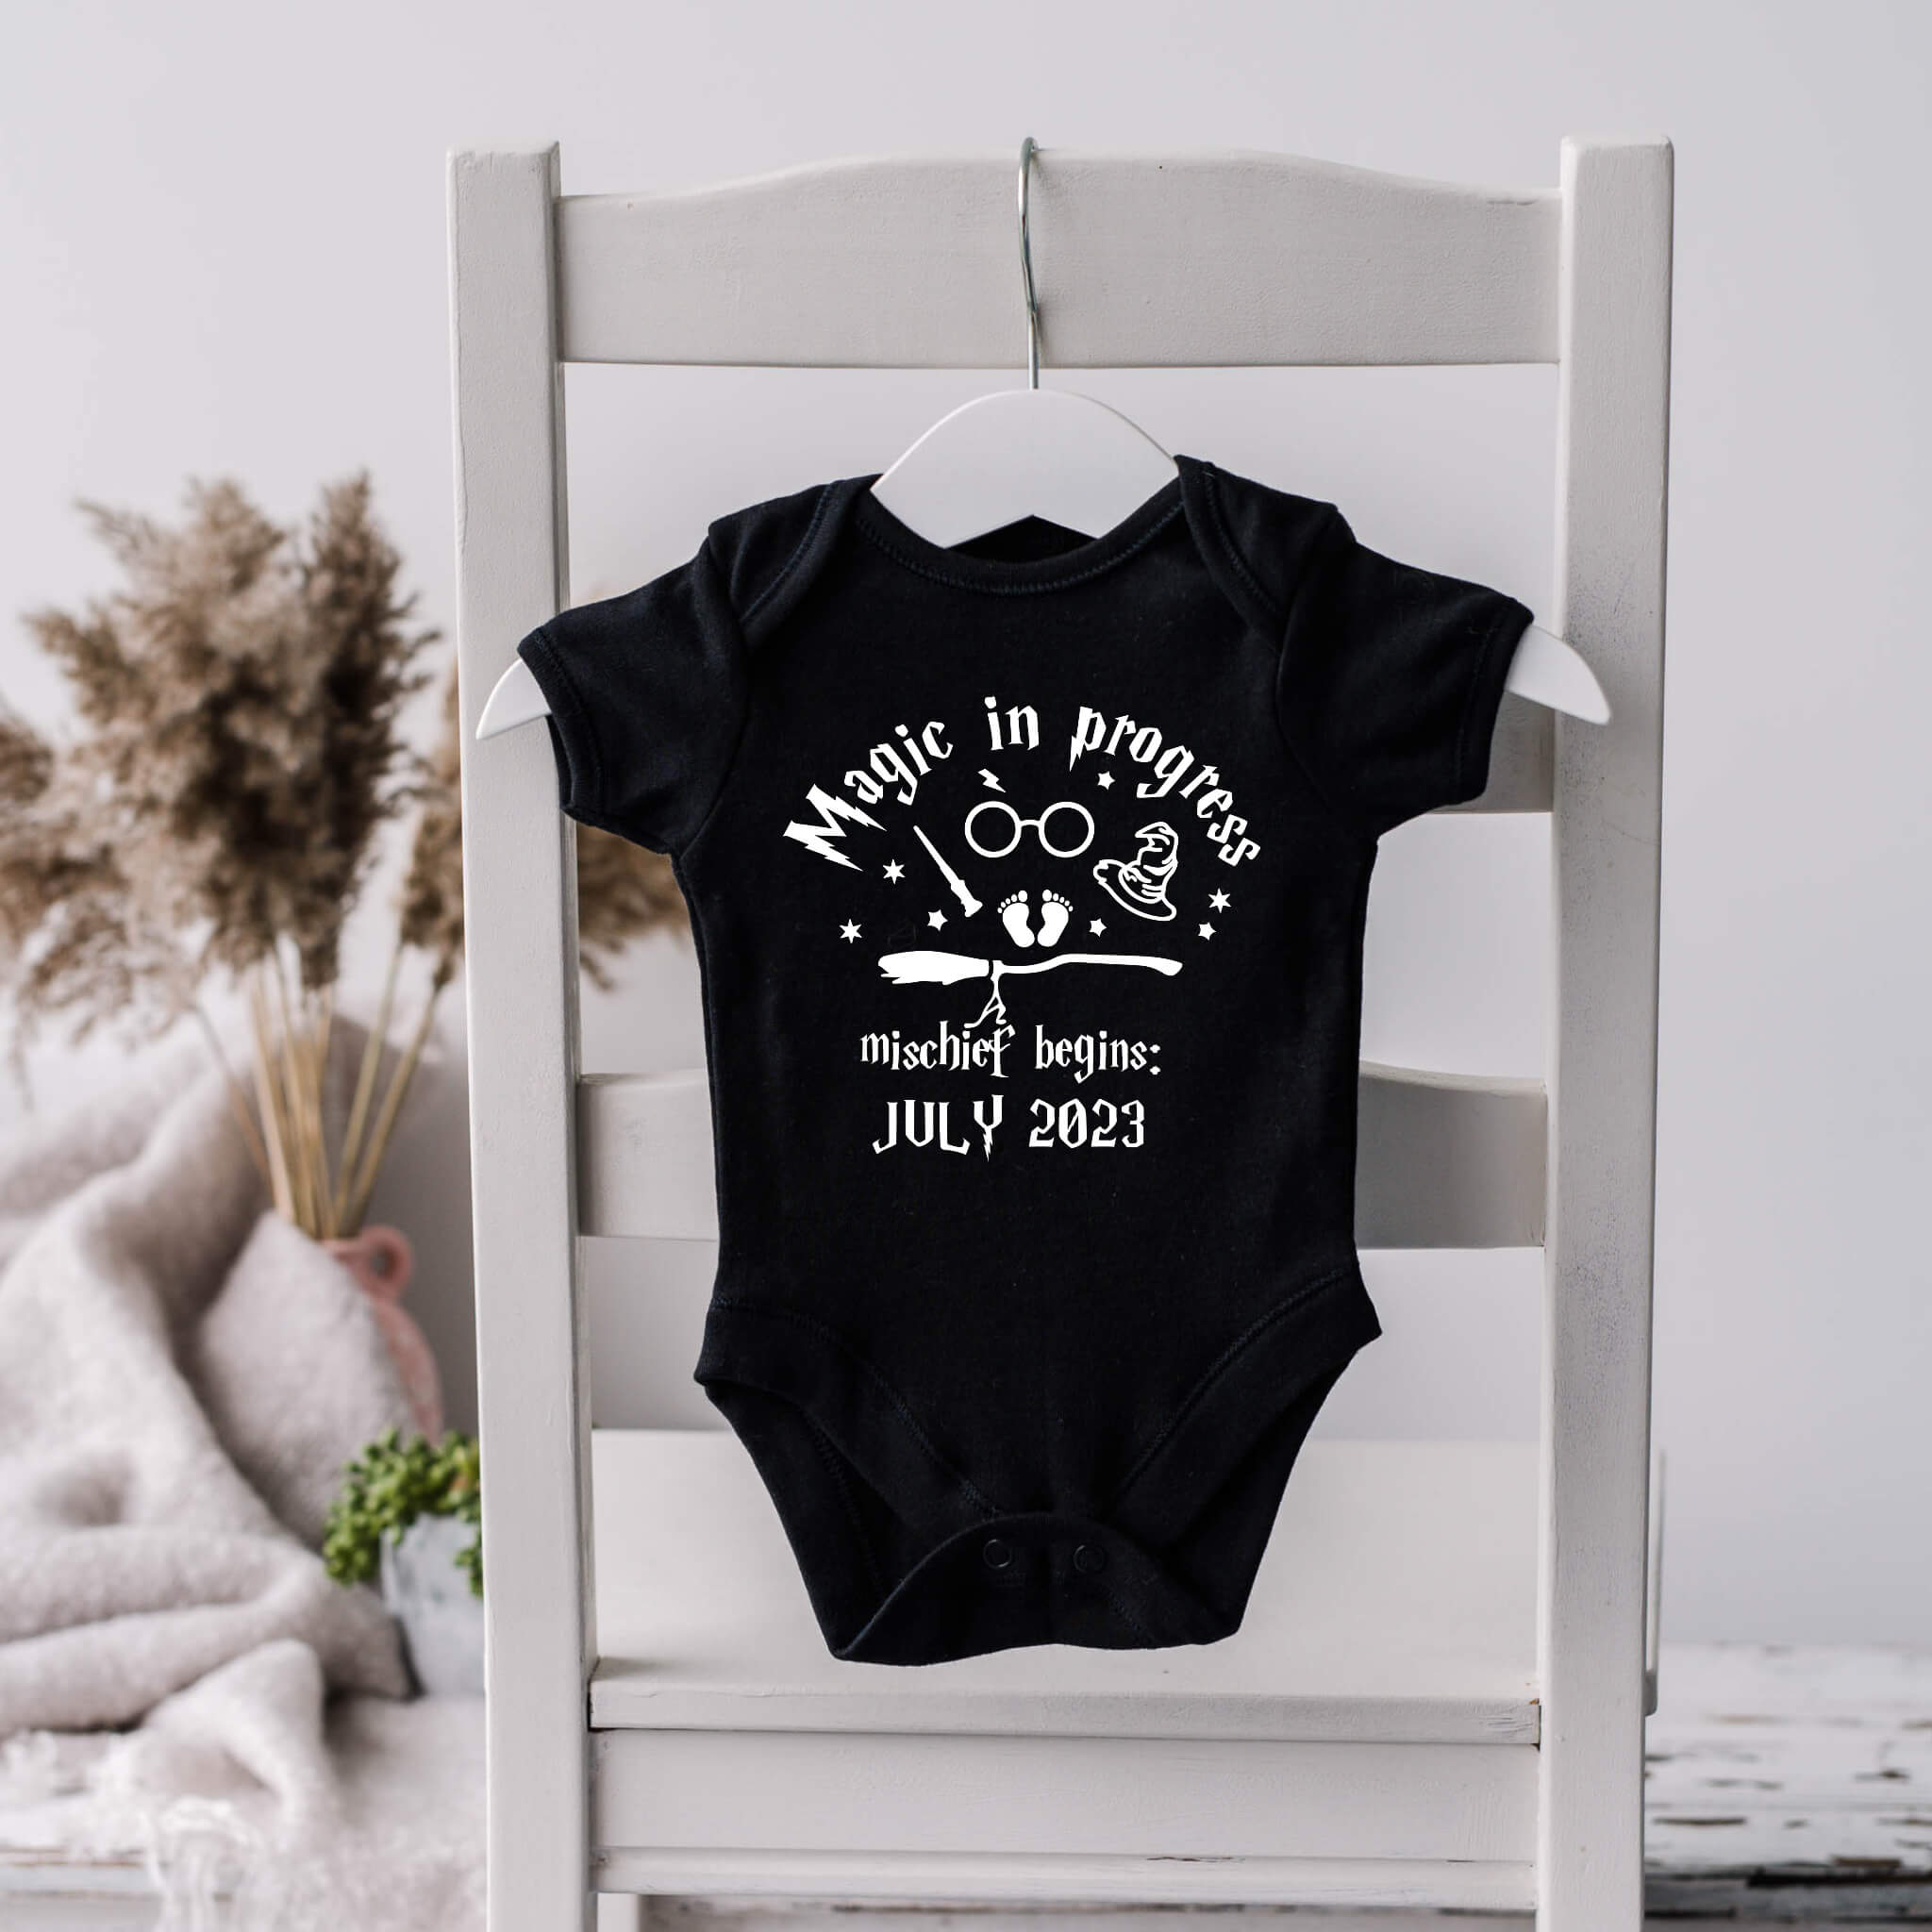 Personalized Pregnancy Announcement Magic In Progress Harry Potter Inspired Customizable Onesie